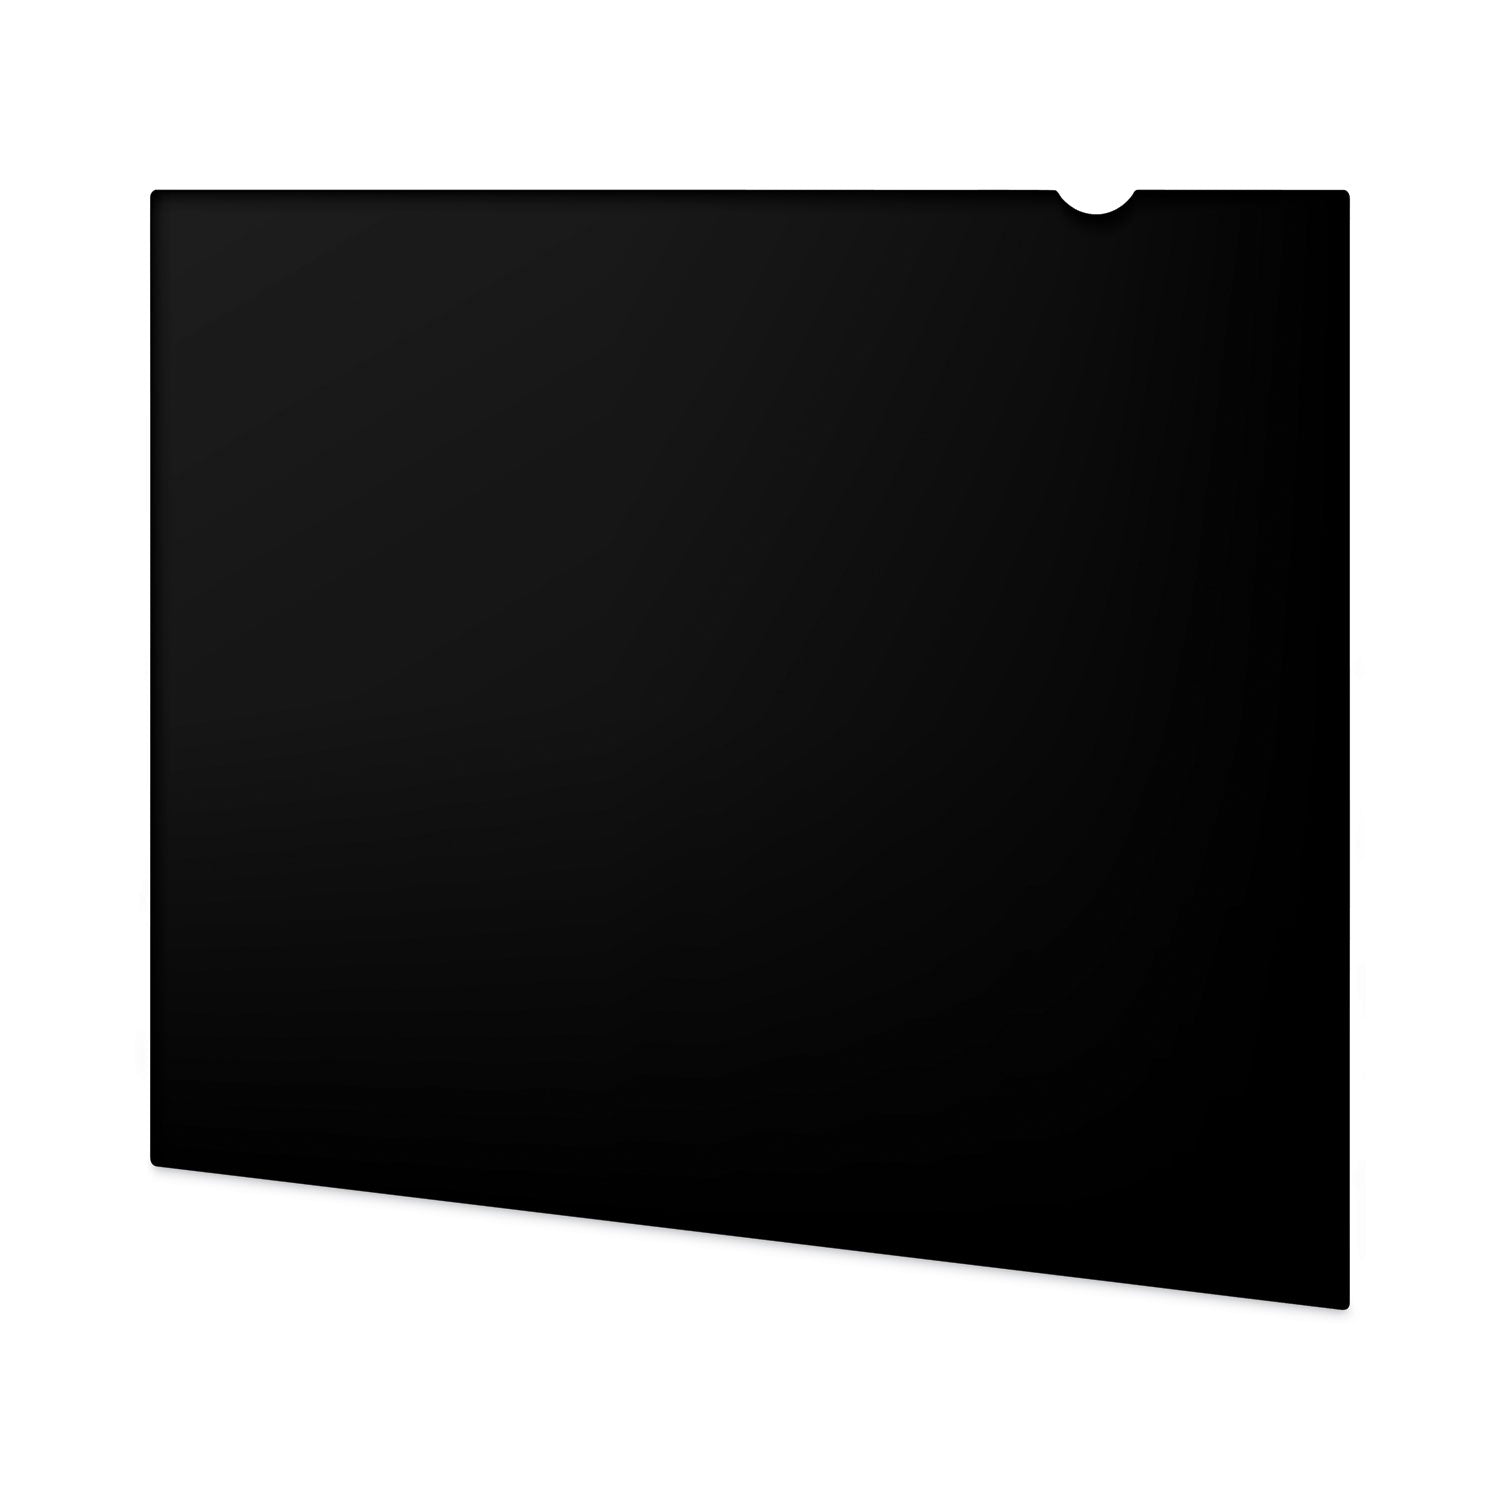 Blackout Privacy Filter for 21.5" Widescreen Flat Panel Monitor, 16:9 Aspect Ratio - 